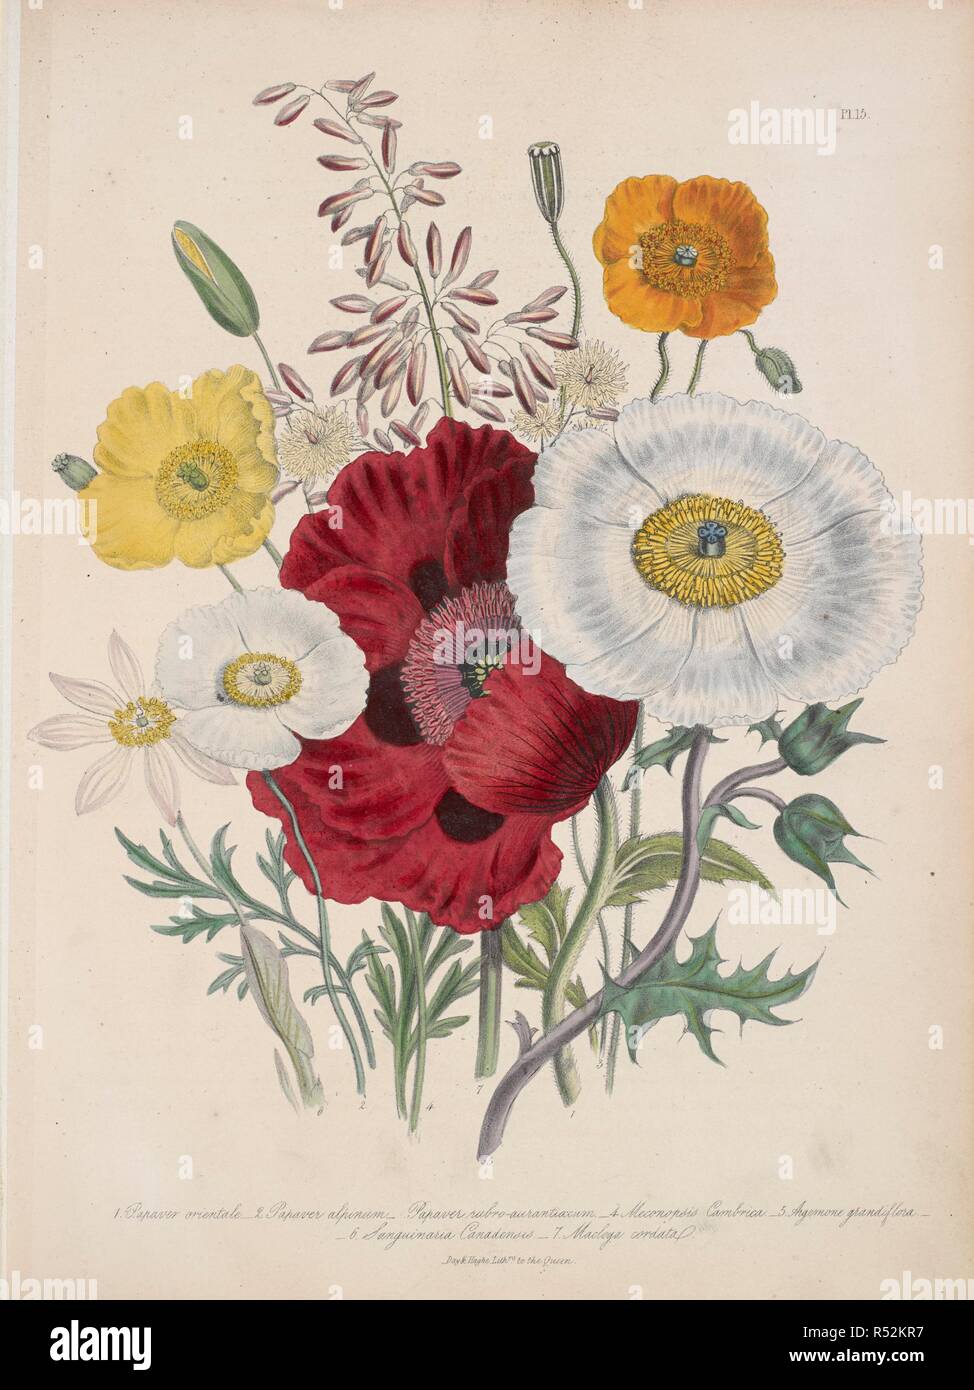 Various poppies : Papaver; Meconopsis cambrica; Argemone grandiflora and Macleaya cordata. Also, Sanguinaria canadensis. . The ladies' flower-garden of ornamental perennials. London, 1843-44. Source: 722.l.6 plate 15. Author: Loudon, Mrs Jane. Stock Photo